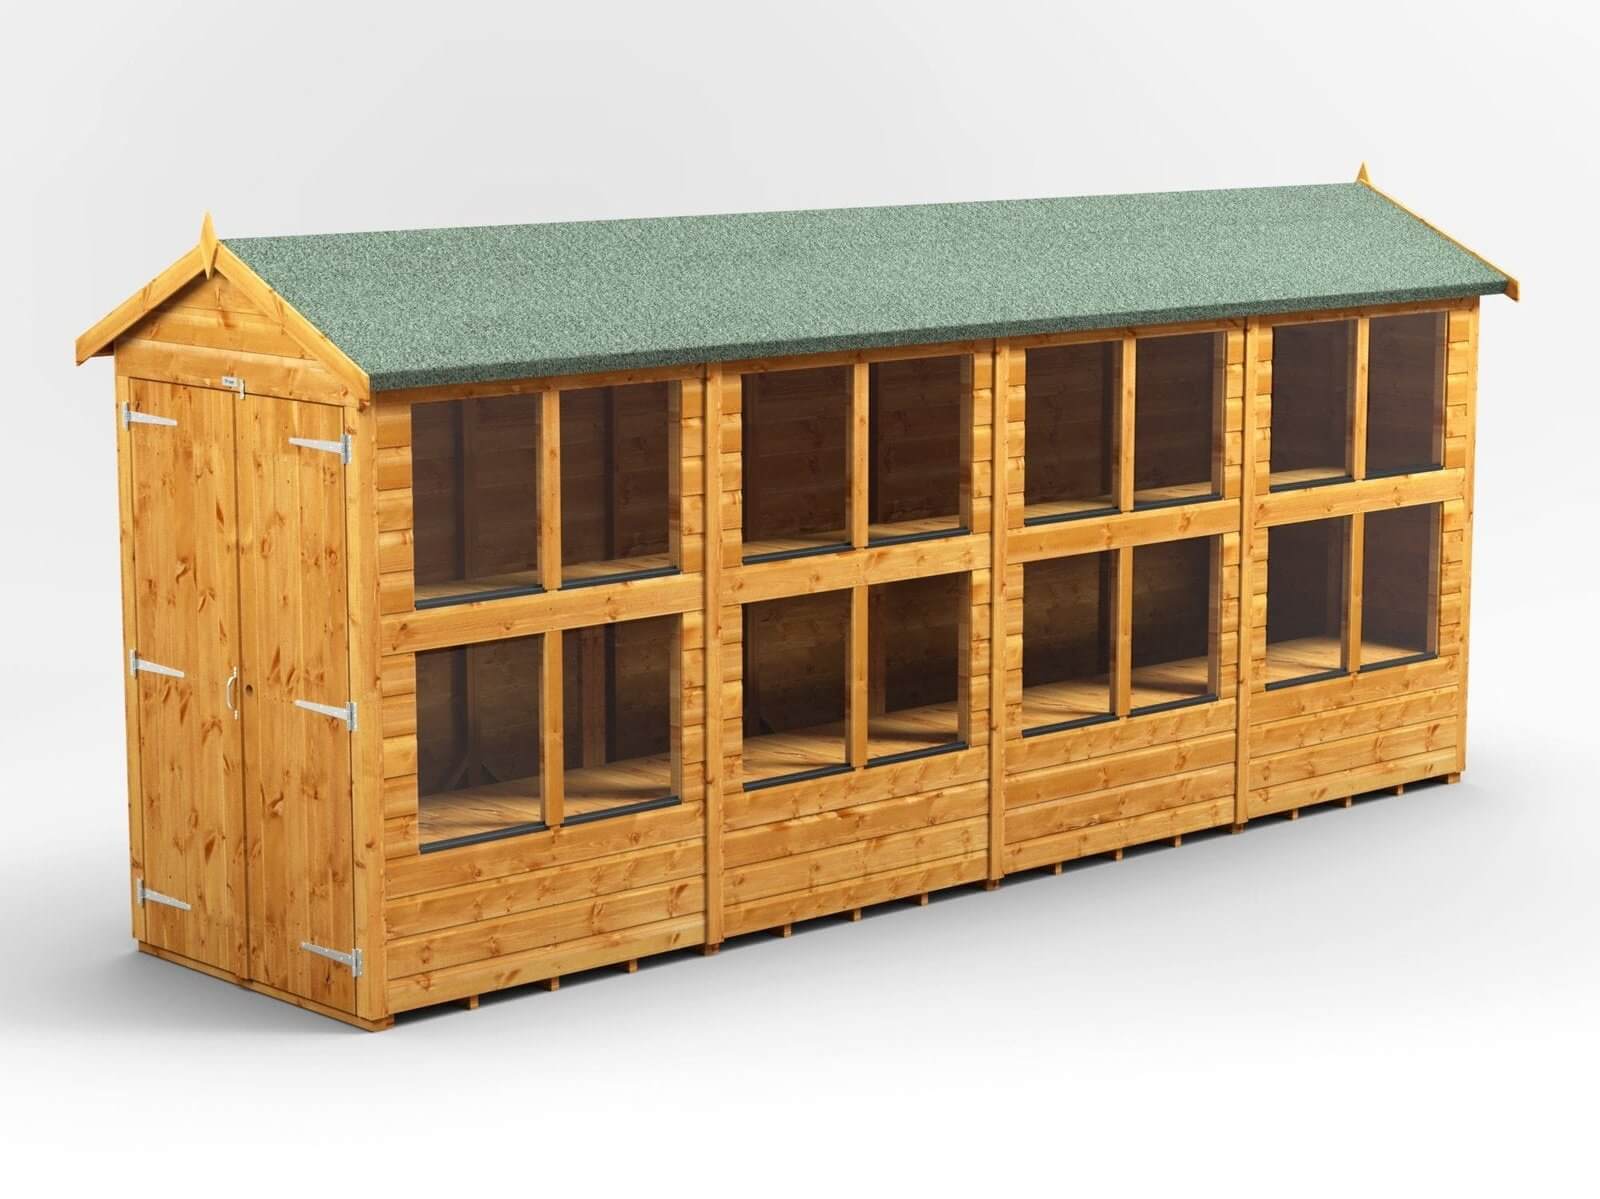 Power Apex Wooden Potting Shed Various Sizes Shed Sizes: Power Apex Potting Shed 16x4